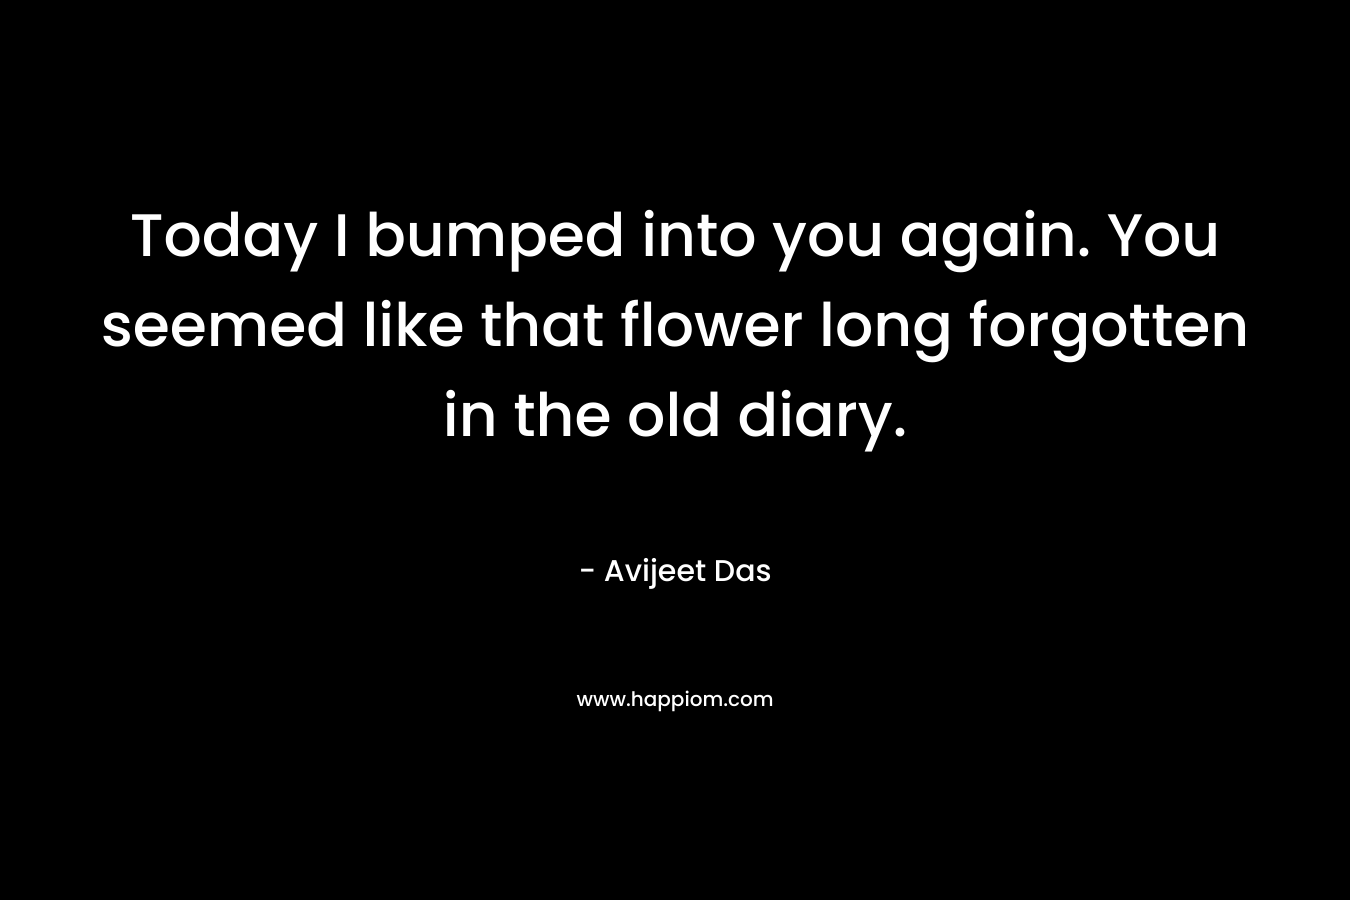 Today I bumped into you again. You seemed like that flower long forgotten in the old diary.